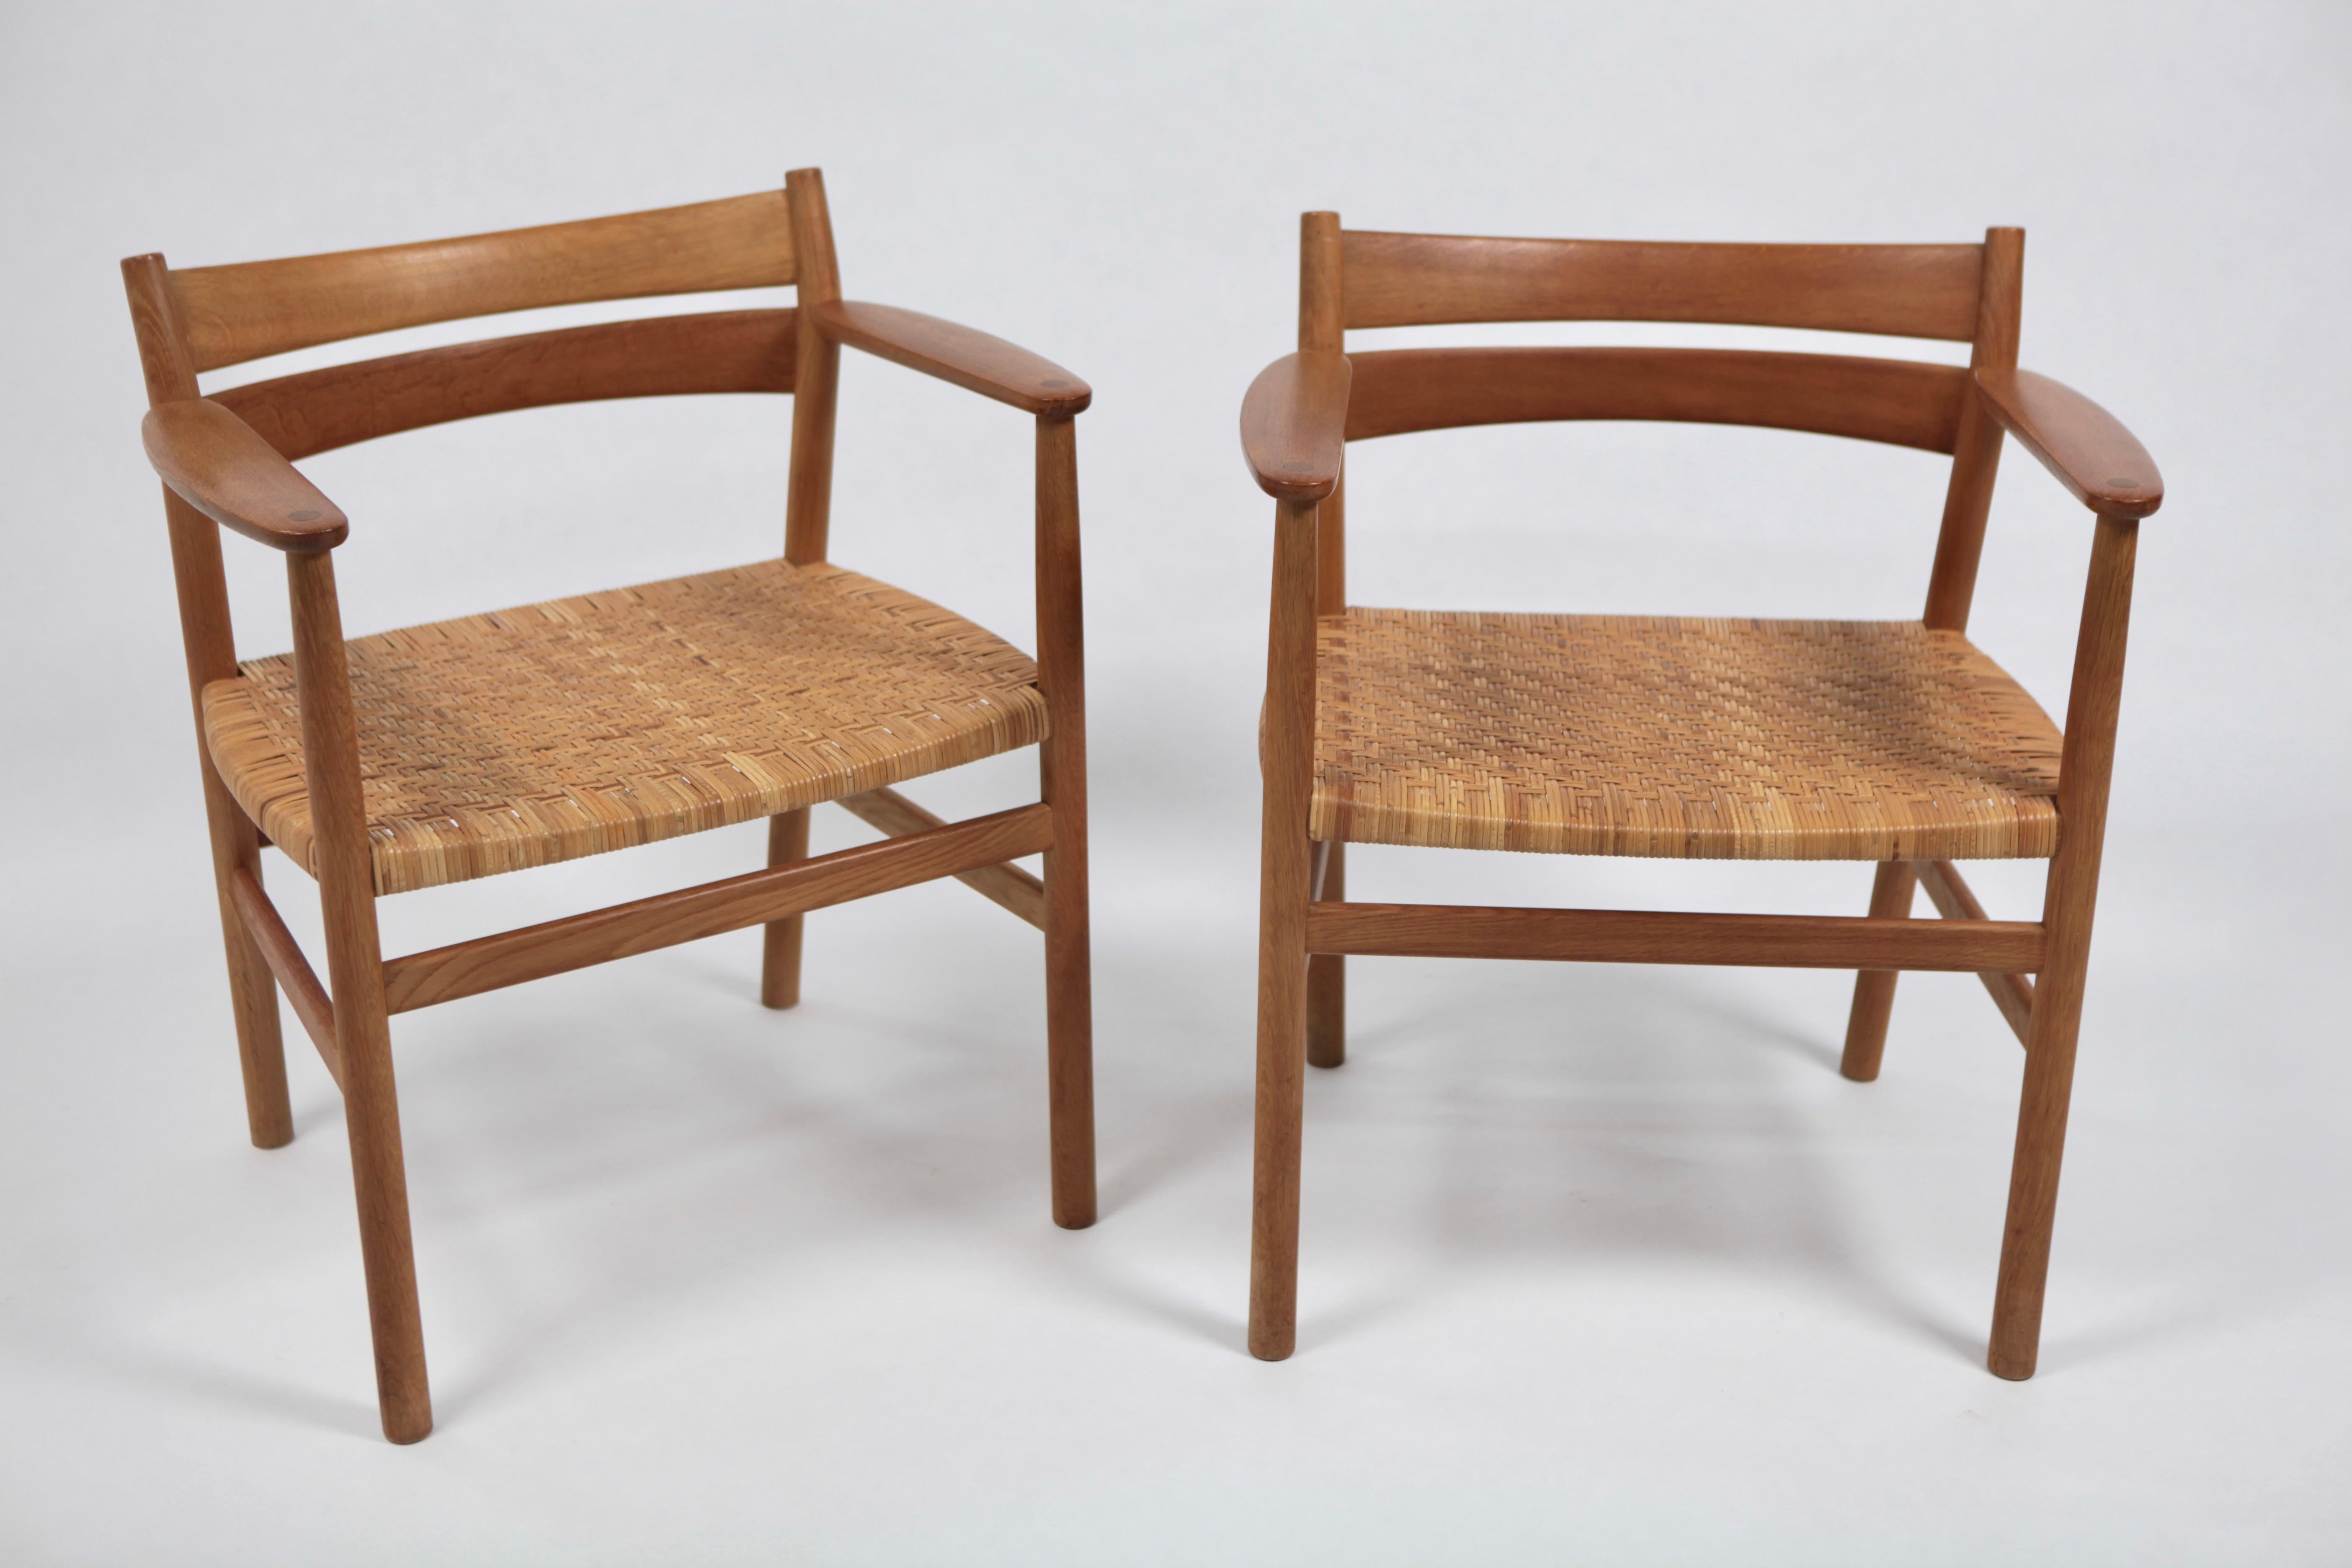 Børge Mogensen, Pair of Rare 'BM1' Armchairs in Oak and Cane, Sweden, 1960s For Sale 9